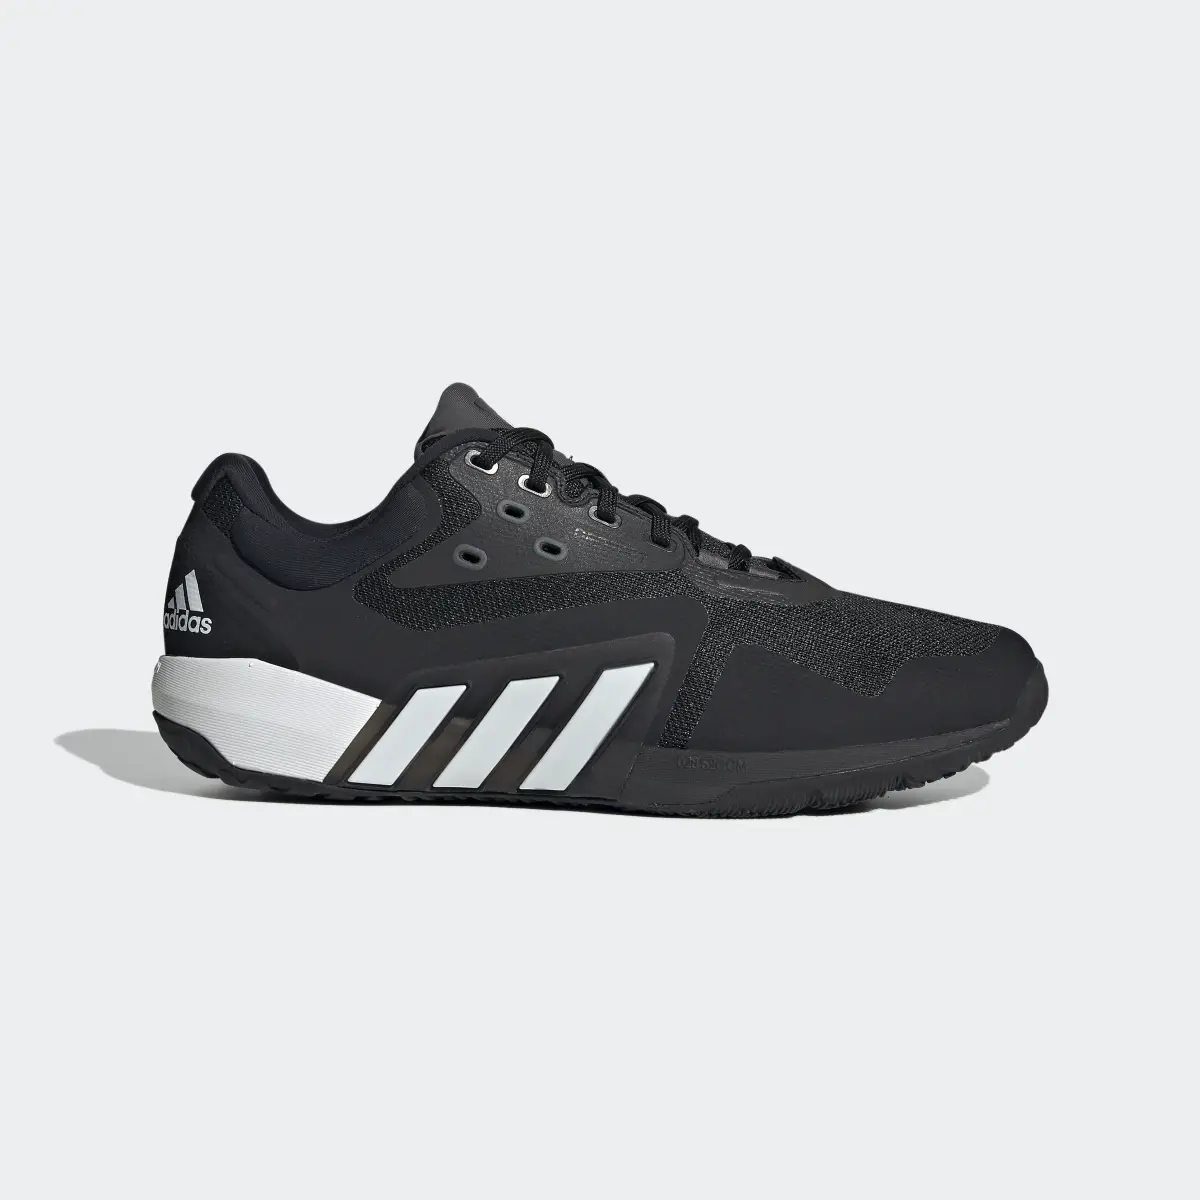 Adidas Dropset Trainer Shoes. 2